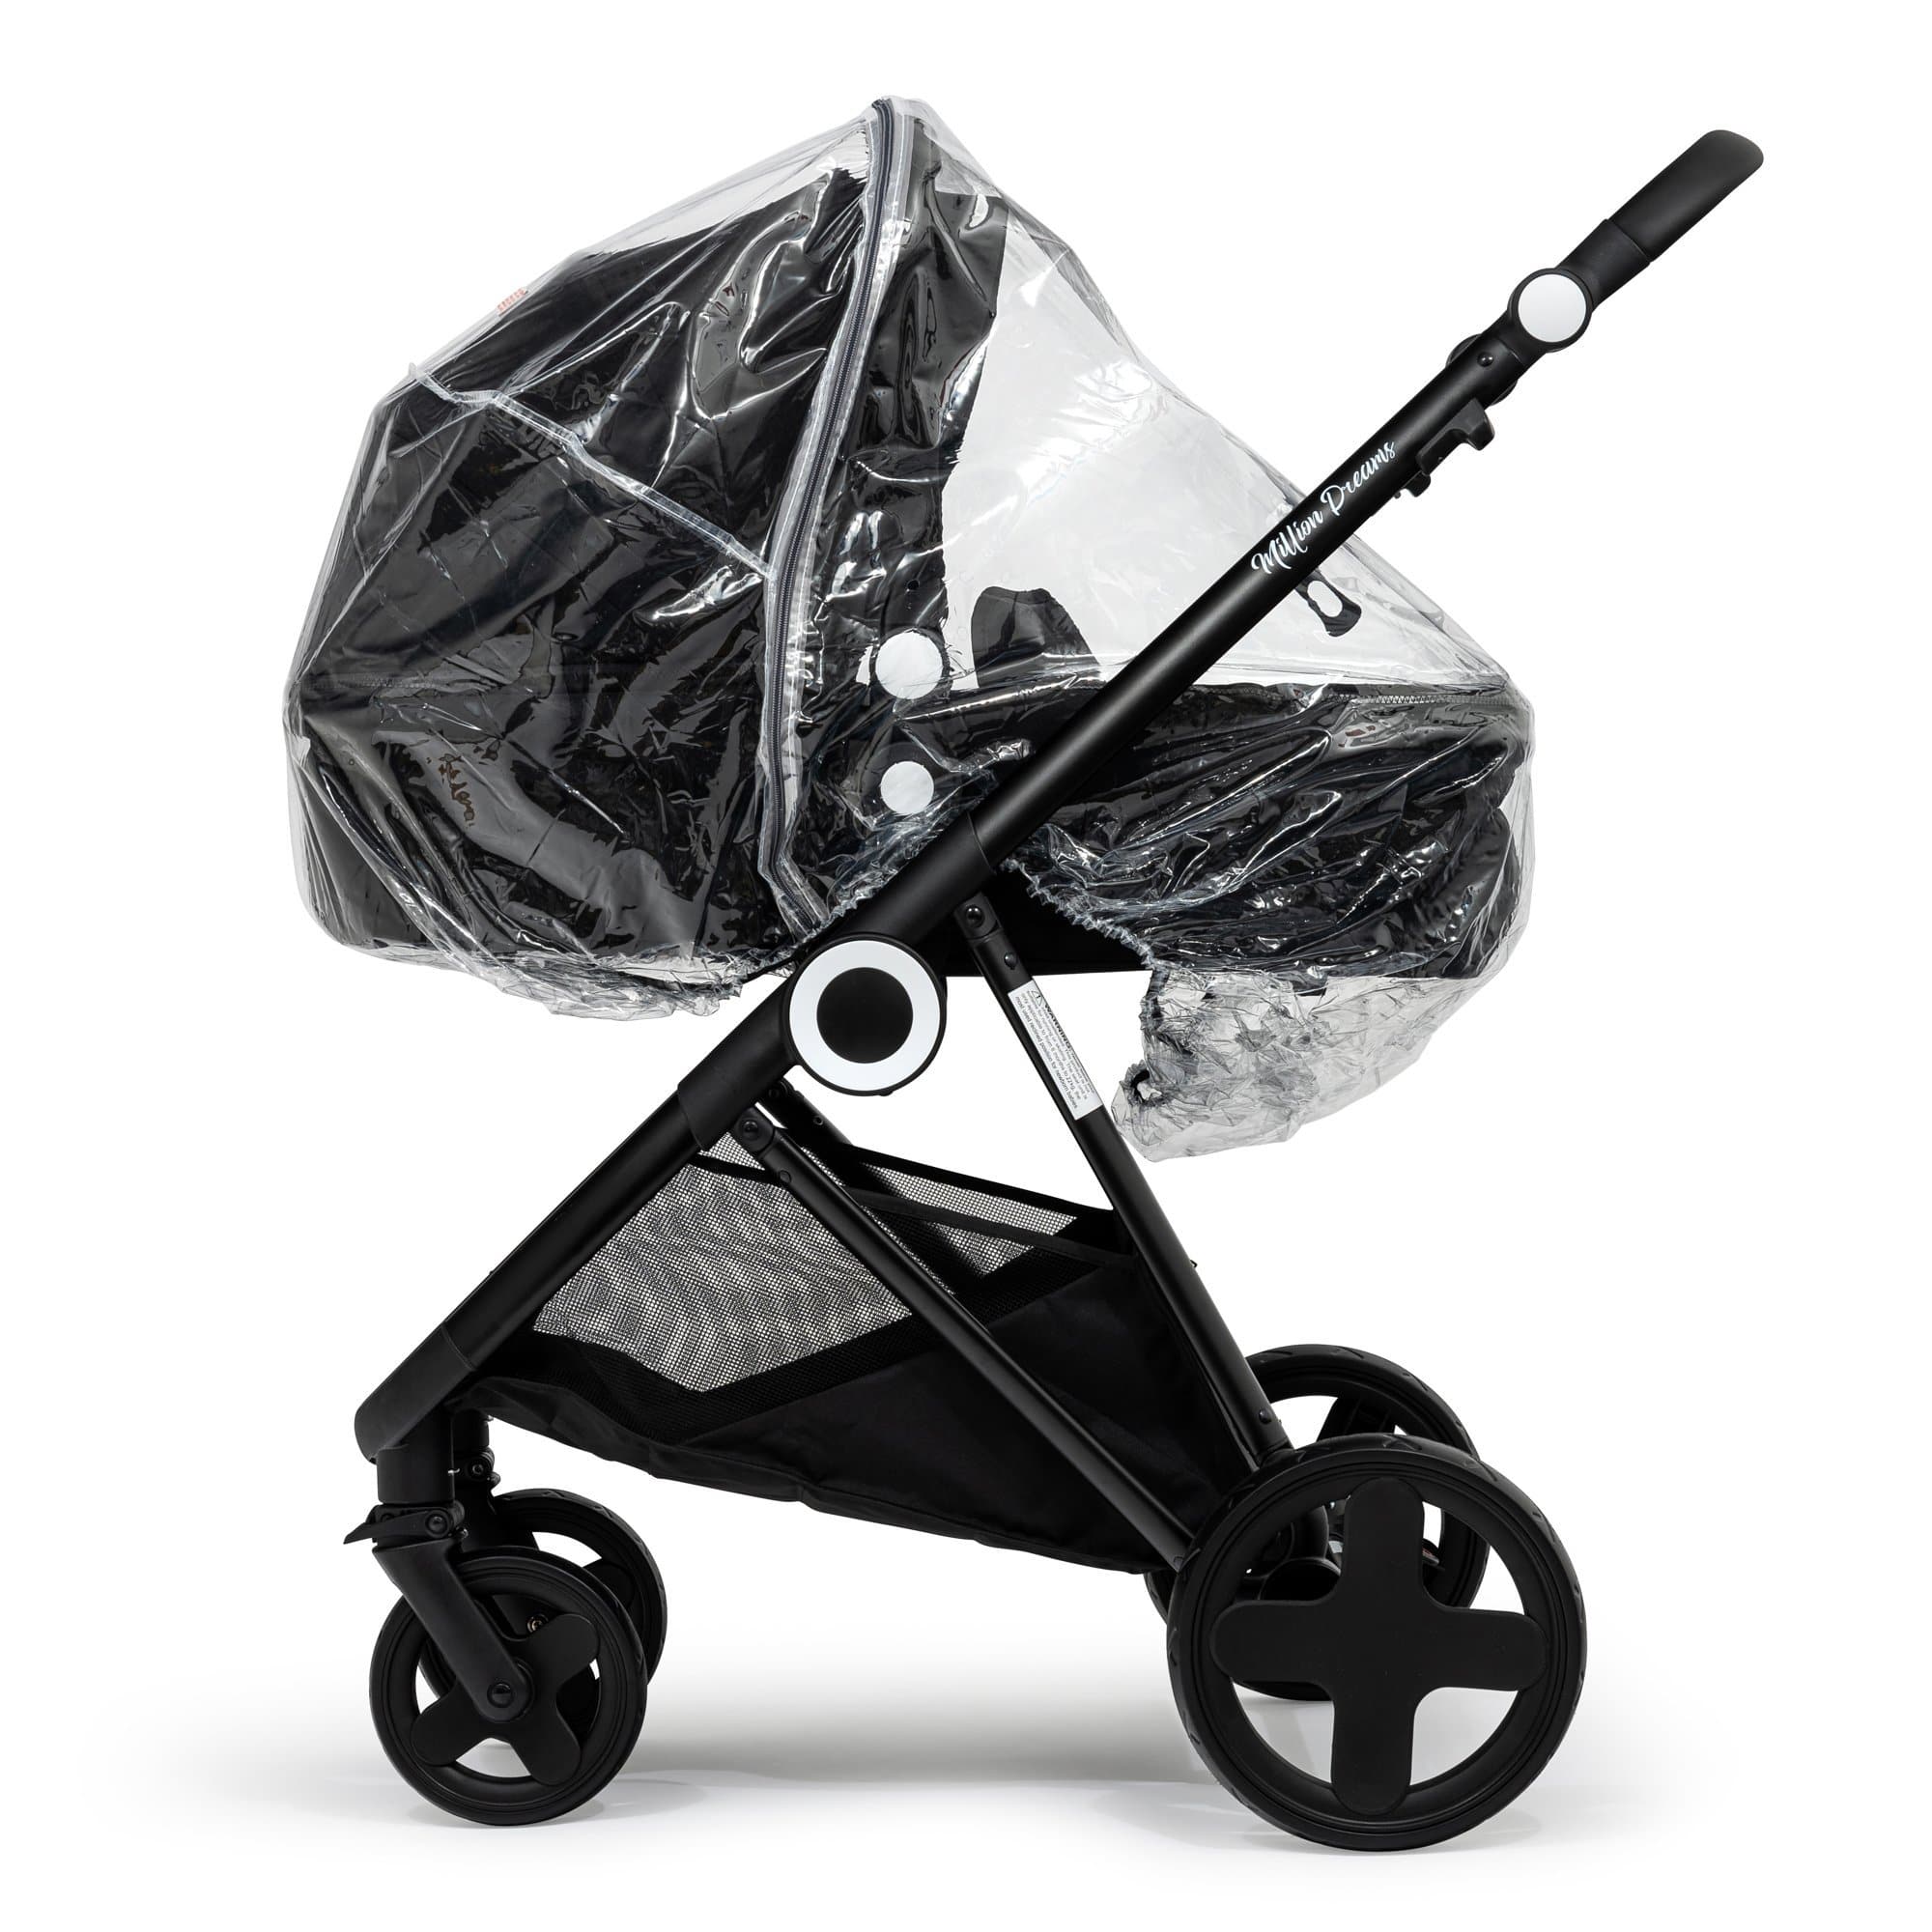 2 in 1 Rain Cover Compatible with Maxi Cosi - Fits All Models - For Your Little One